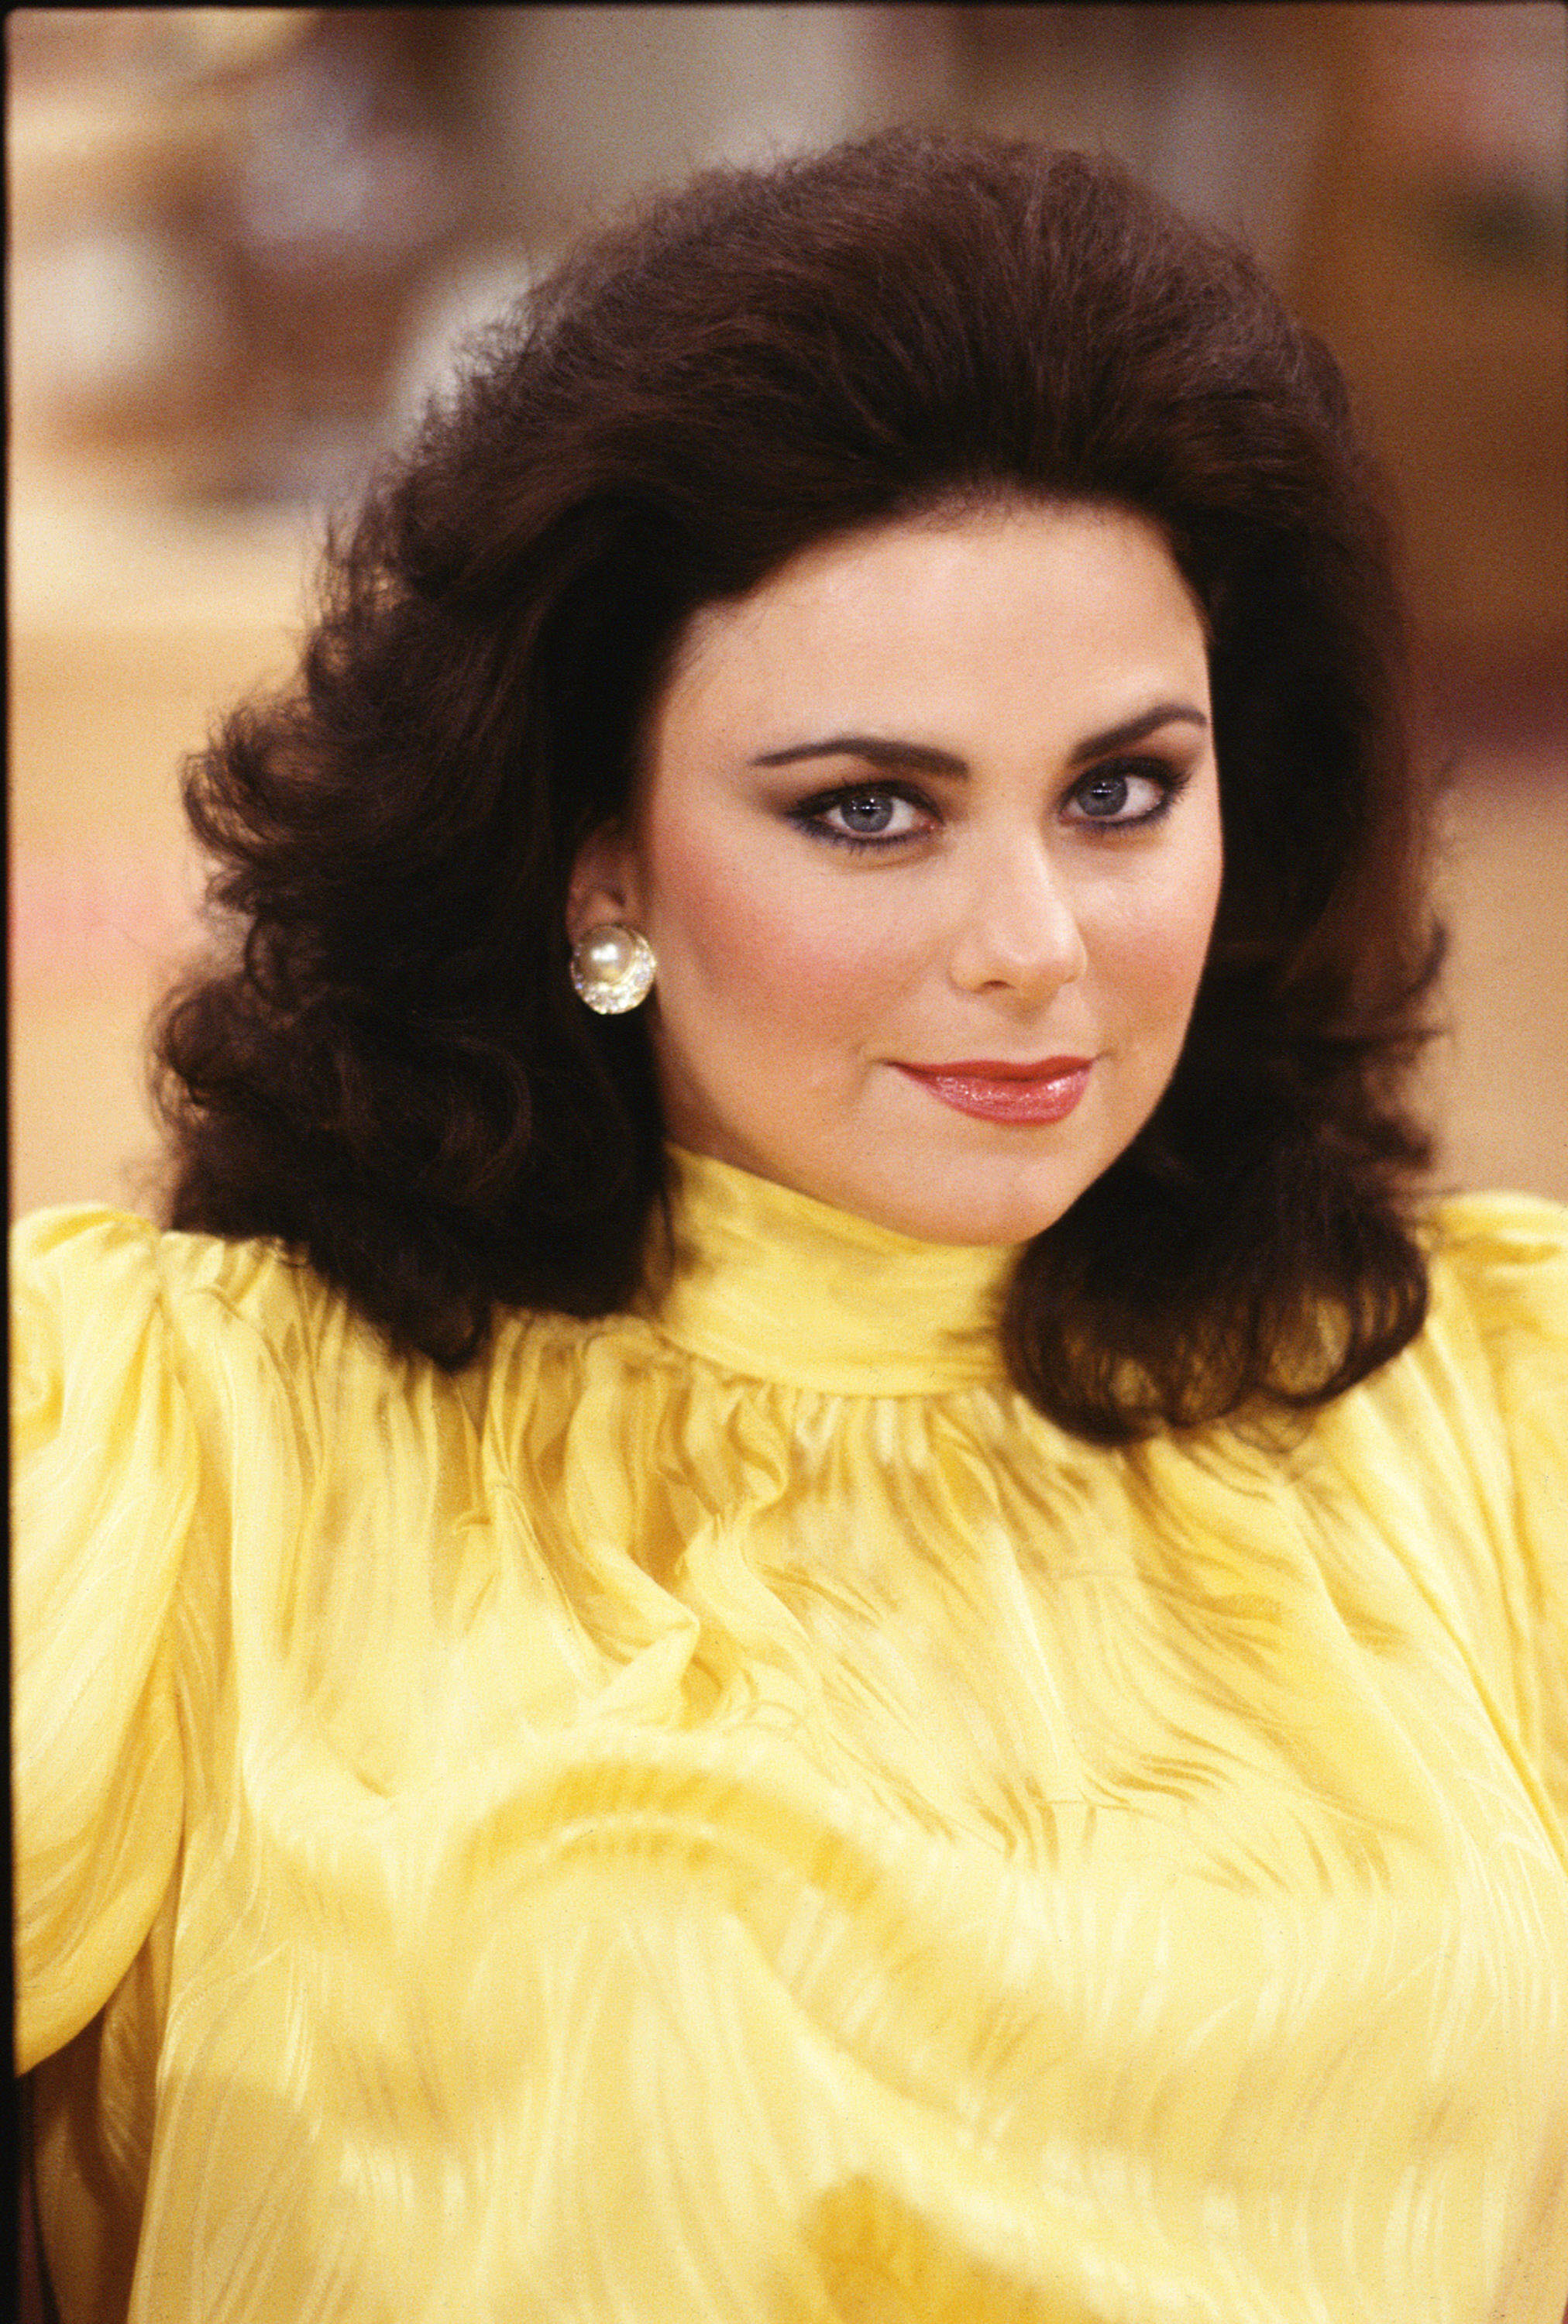 Actress Delta Burke as Suzanne Sugarbaker in the CBS television series "Designing Women" on January 1, 1987 | Source: Getty Images